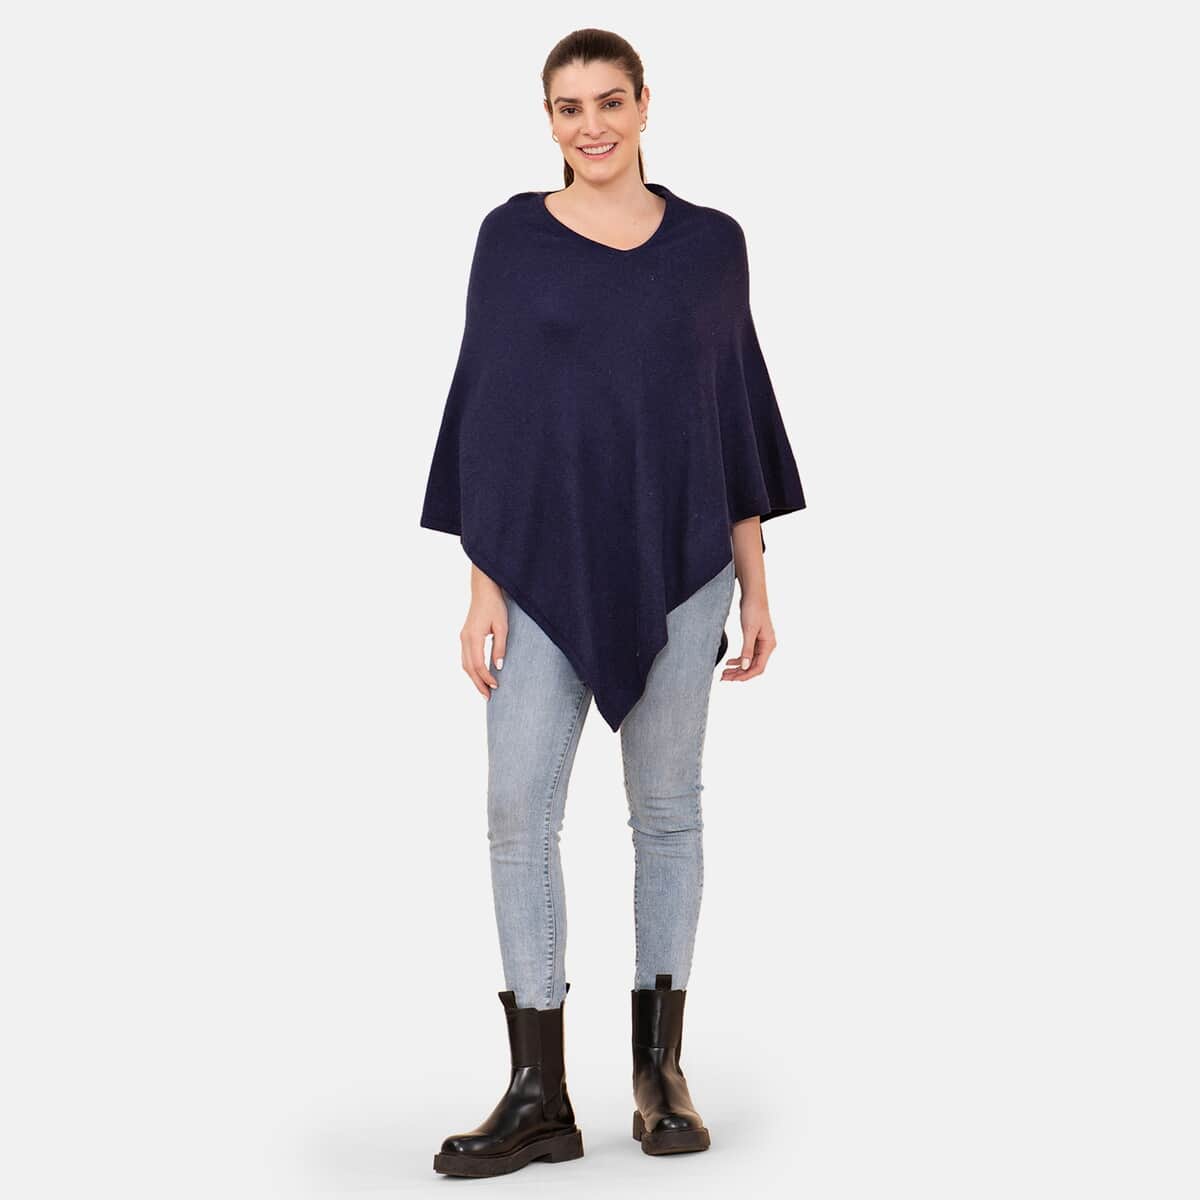 LA MAREY Cashmere Wool Black Poncho (One Size Fits Most, 28"x28") image number 0